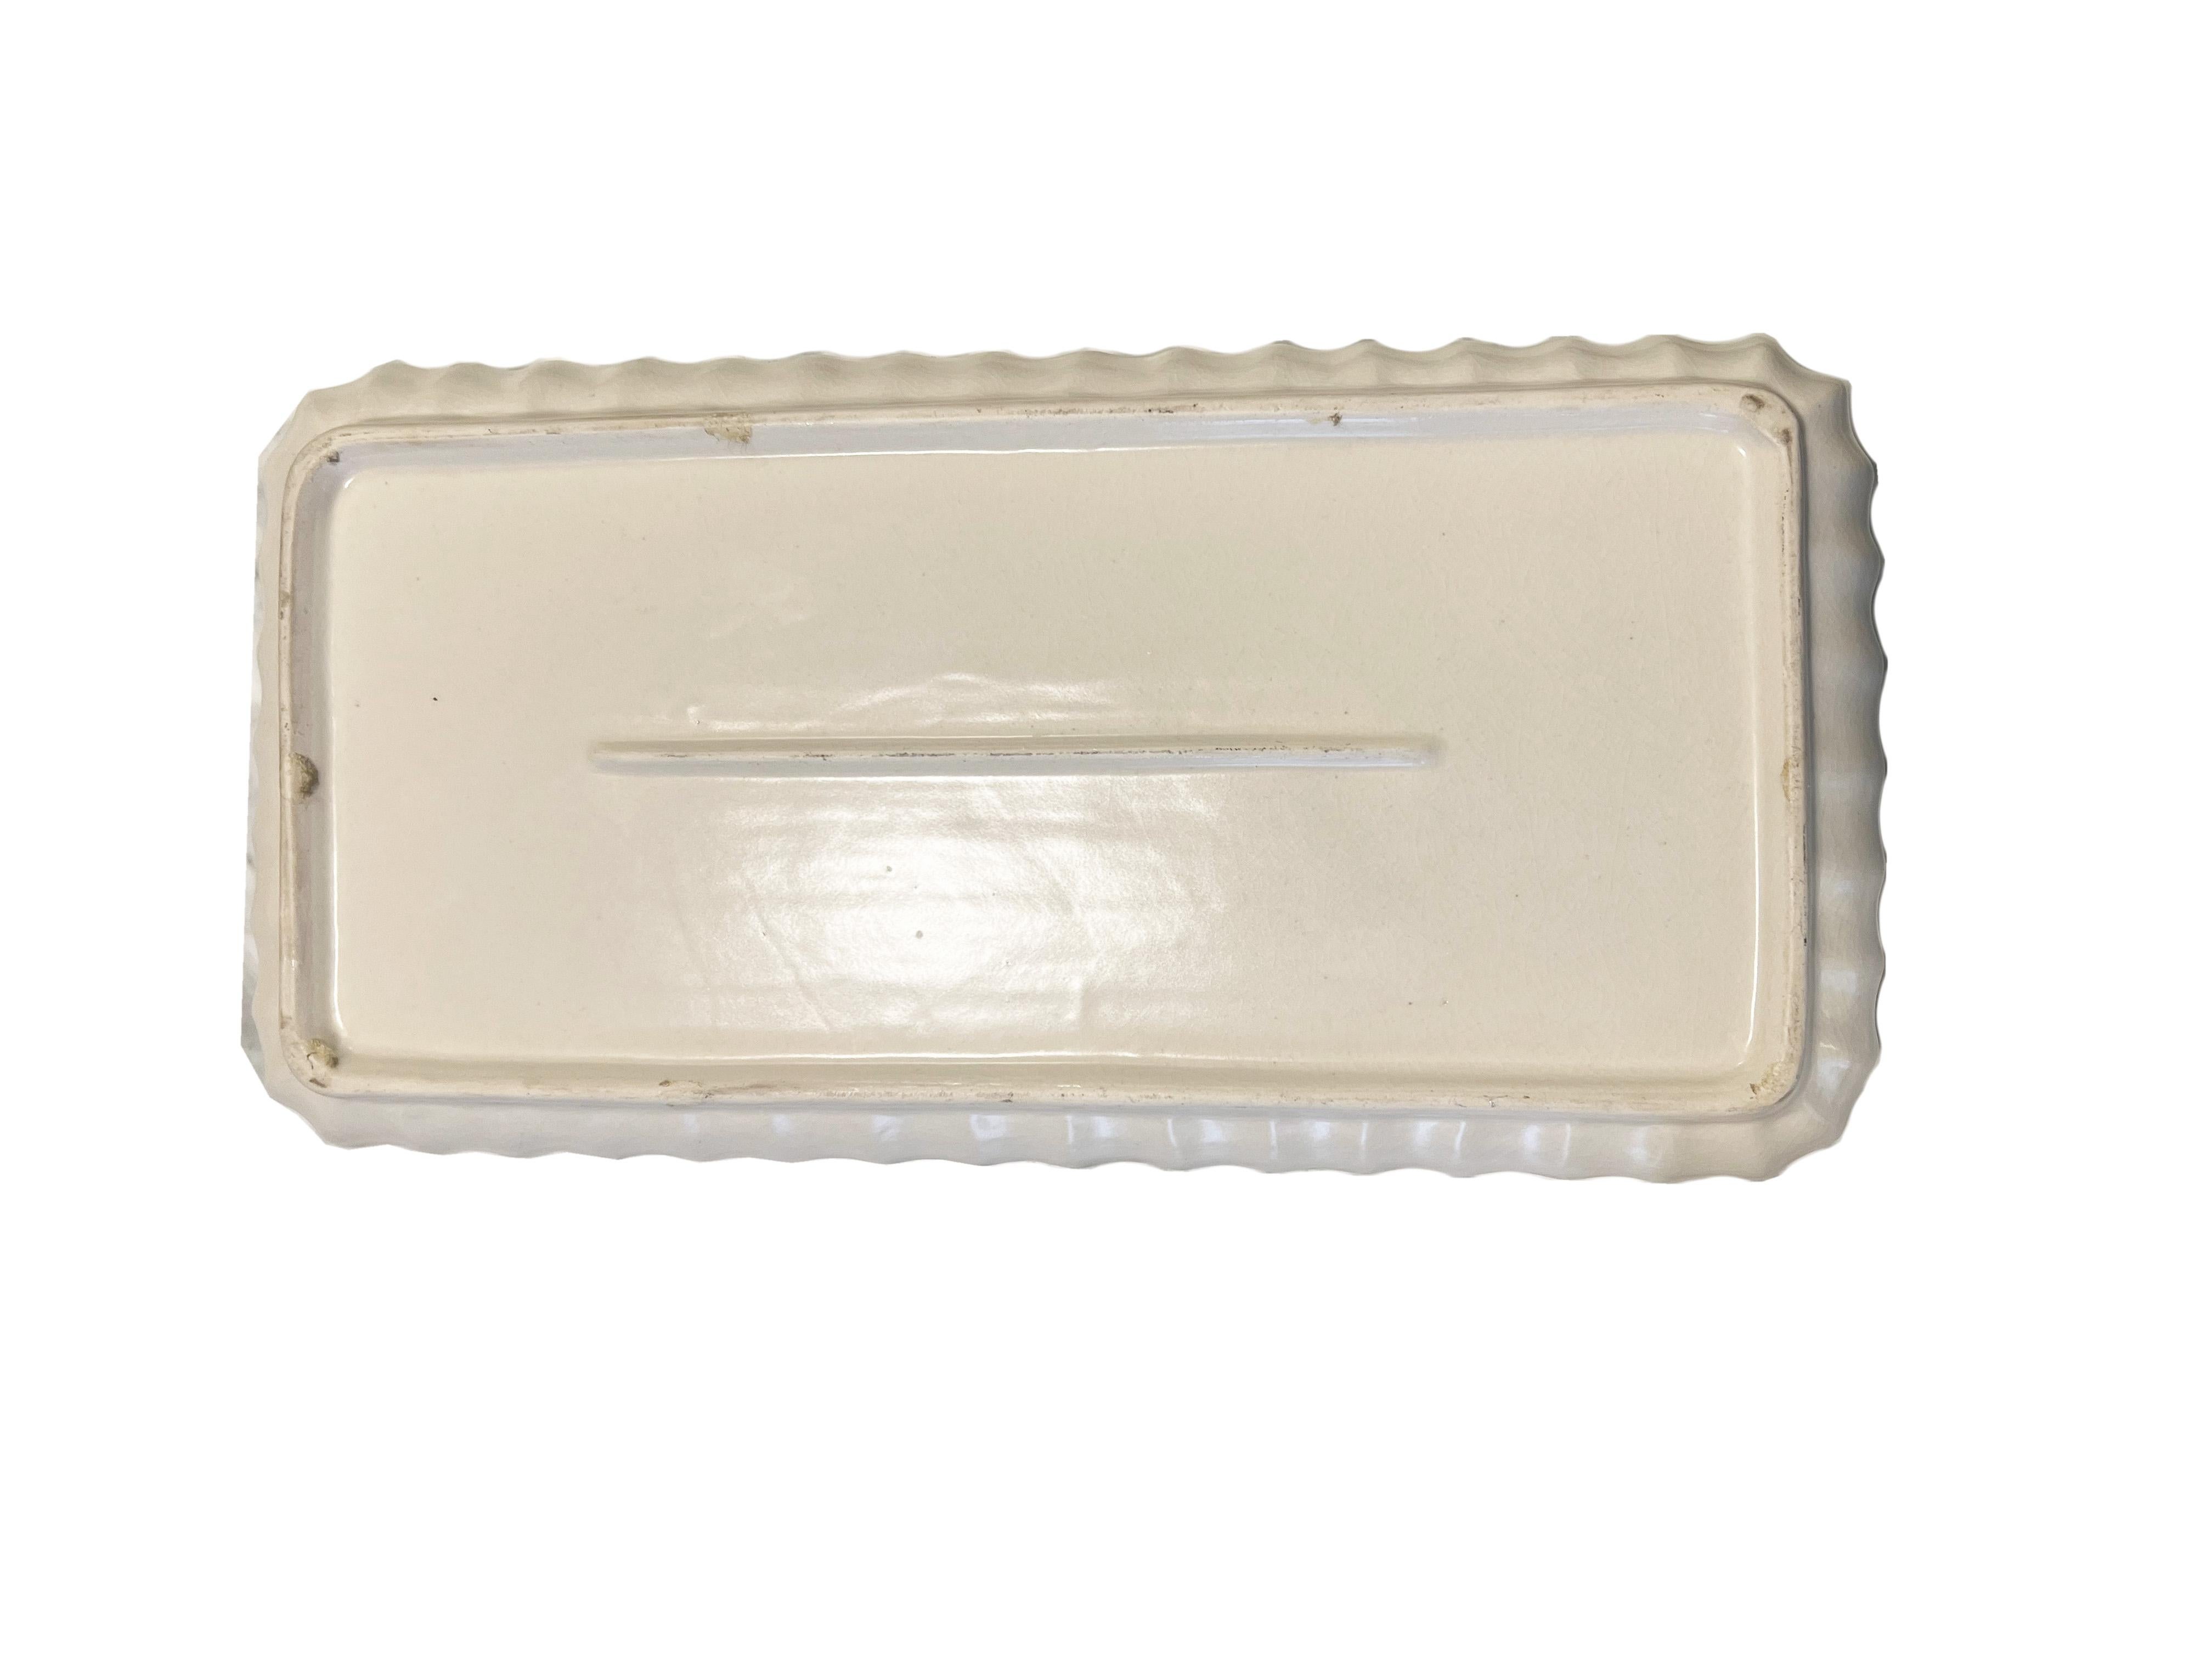 Waterwork Ceramic Tray In Good Condition For Sale In Scottsdale, AZ